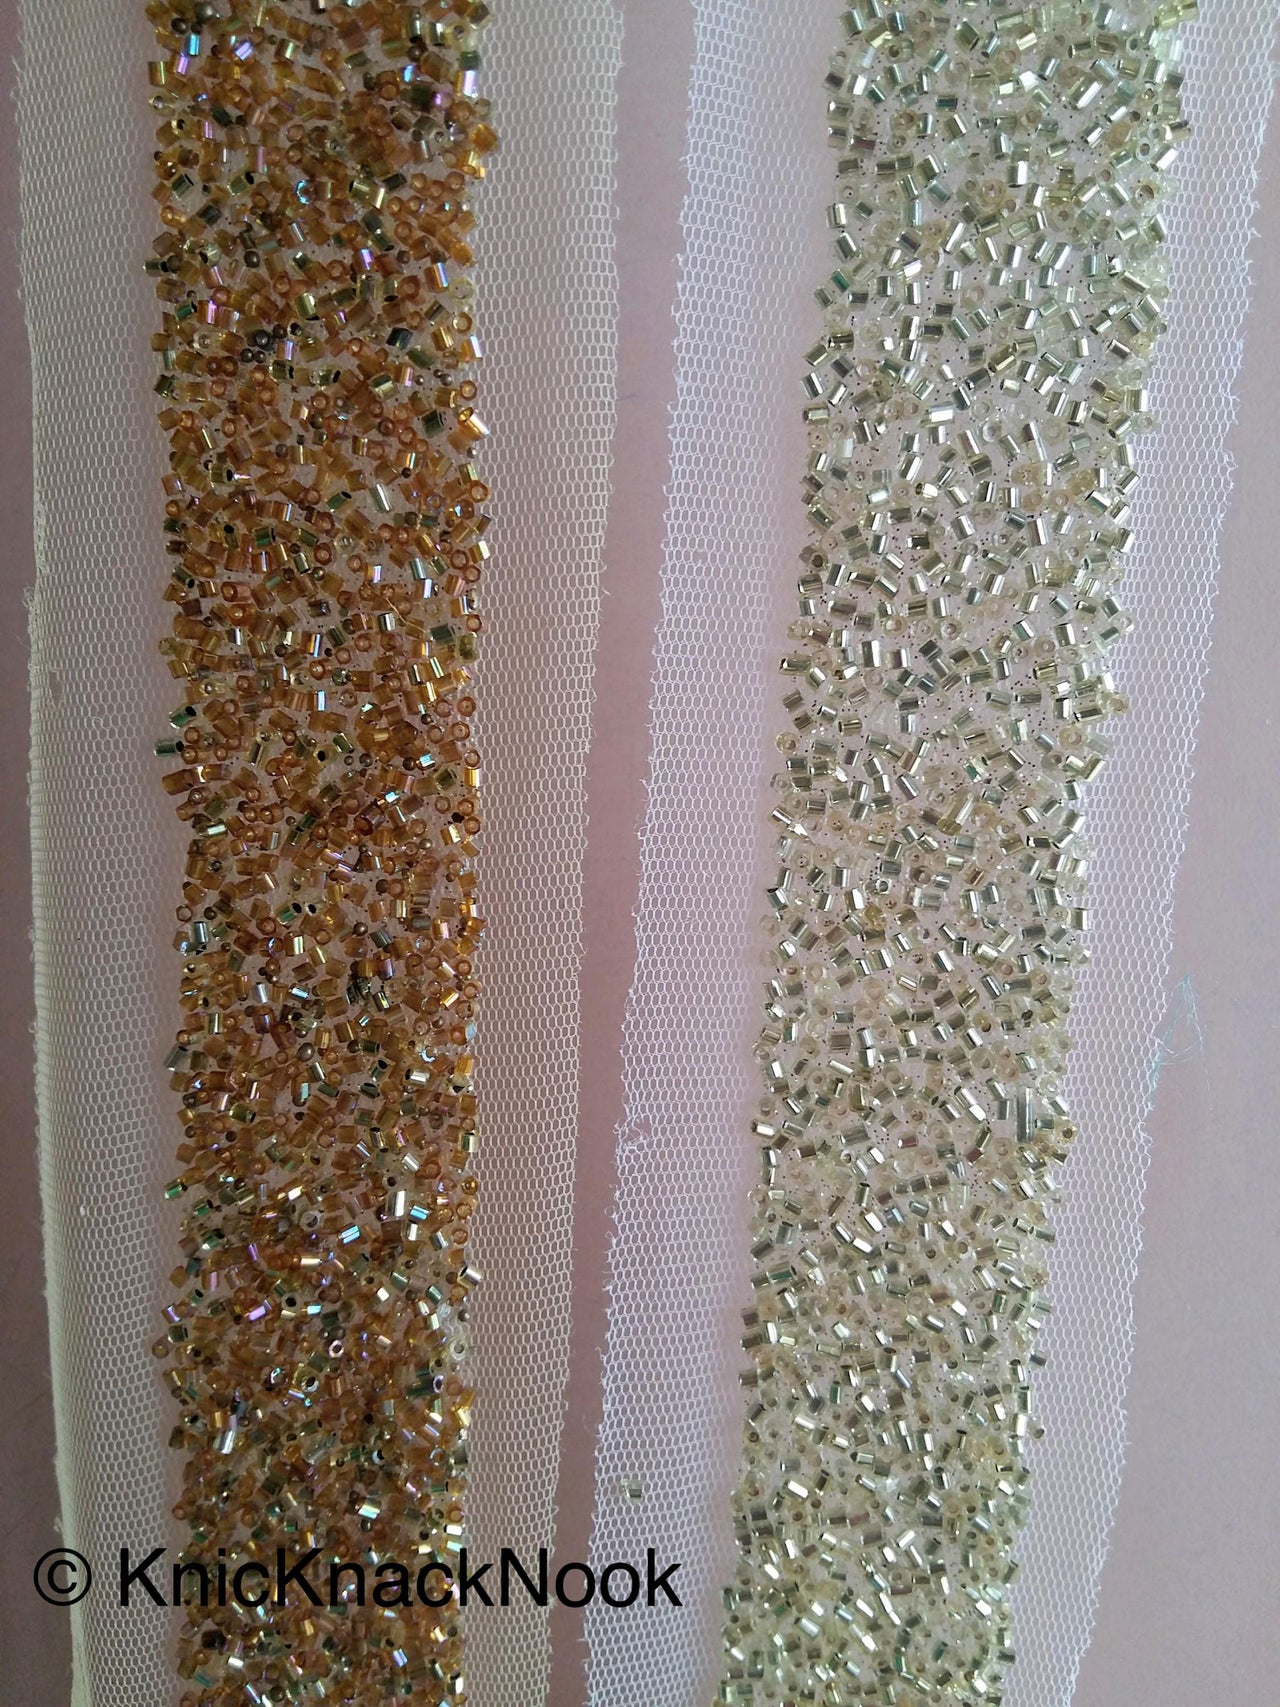 Beige Net Trim With Gold / Copper Beads Embellishments - 200317L199/ 200